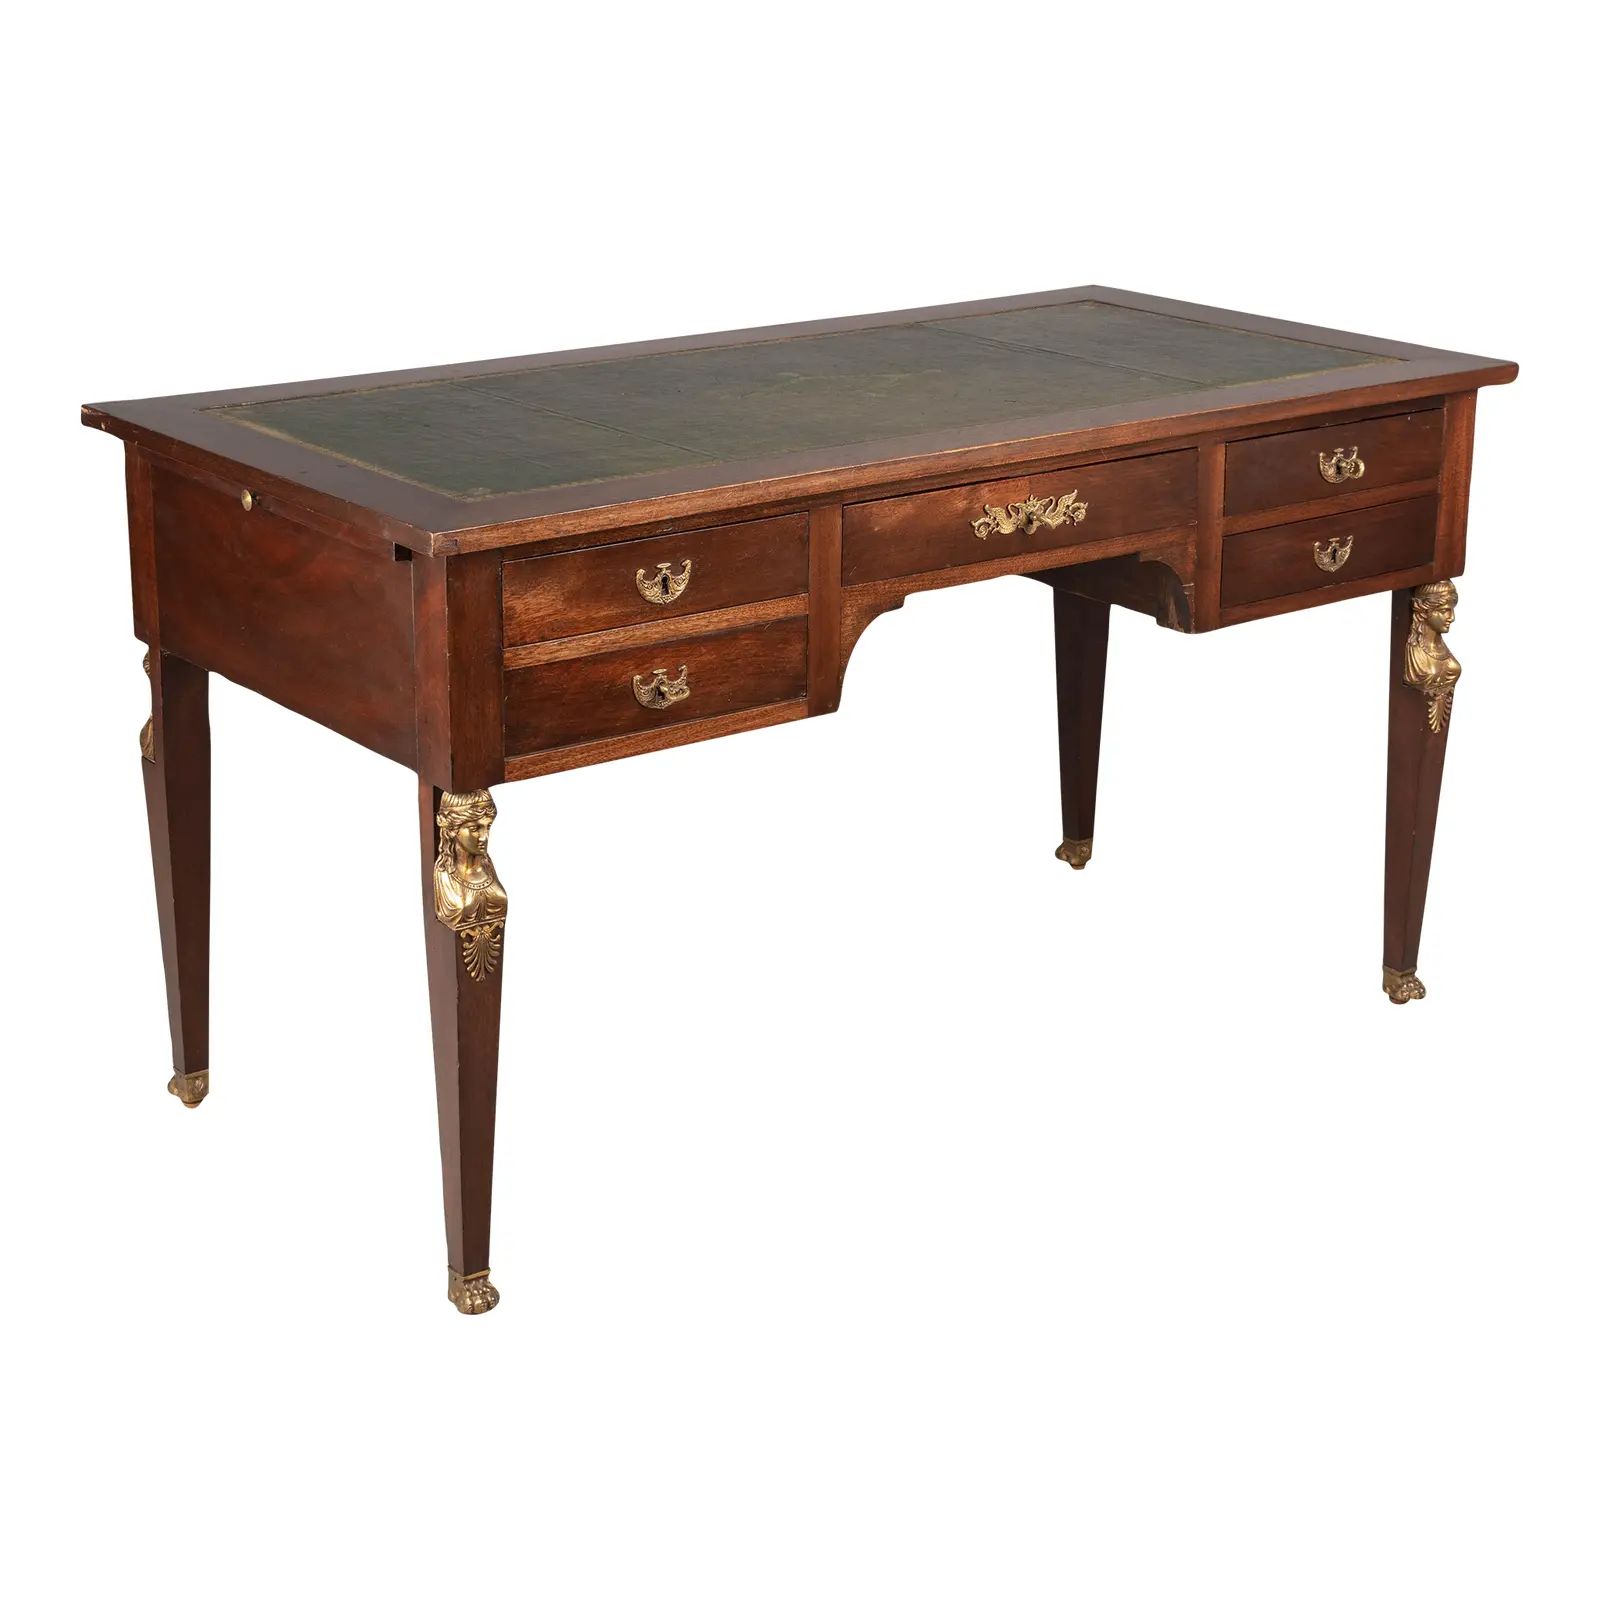 French Empire Style Leather Top Mahogany Desk | Chairish